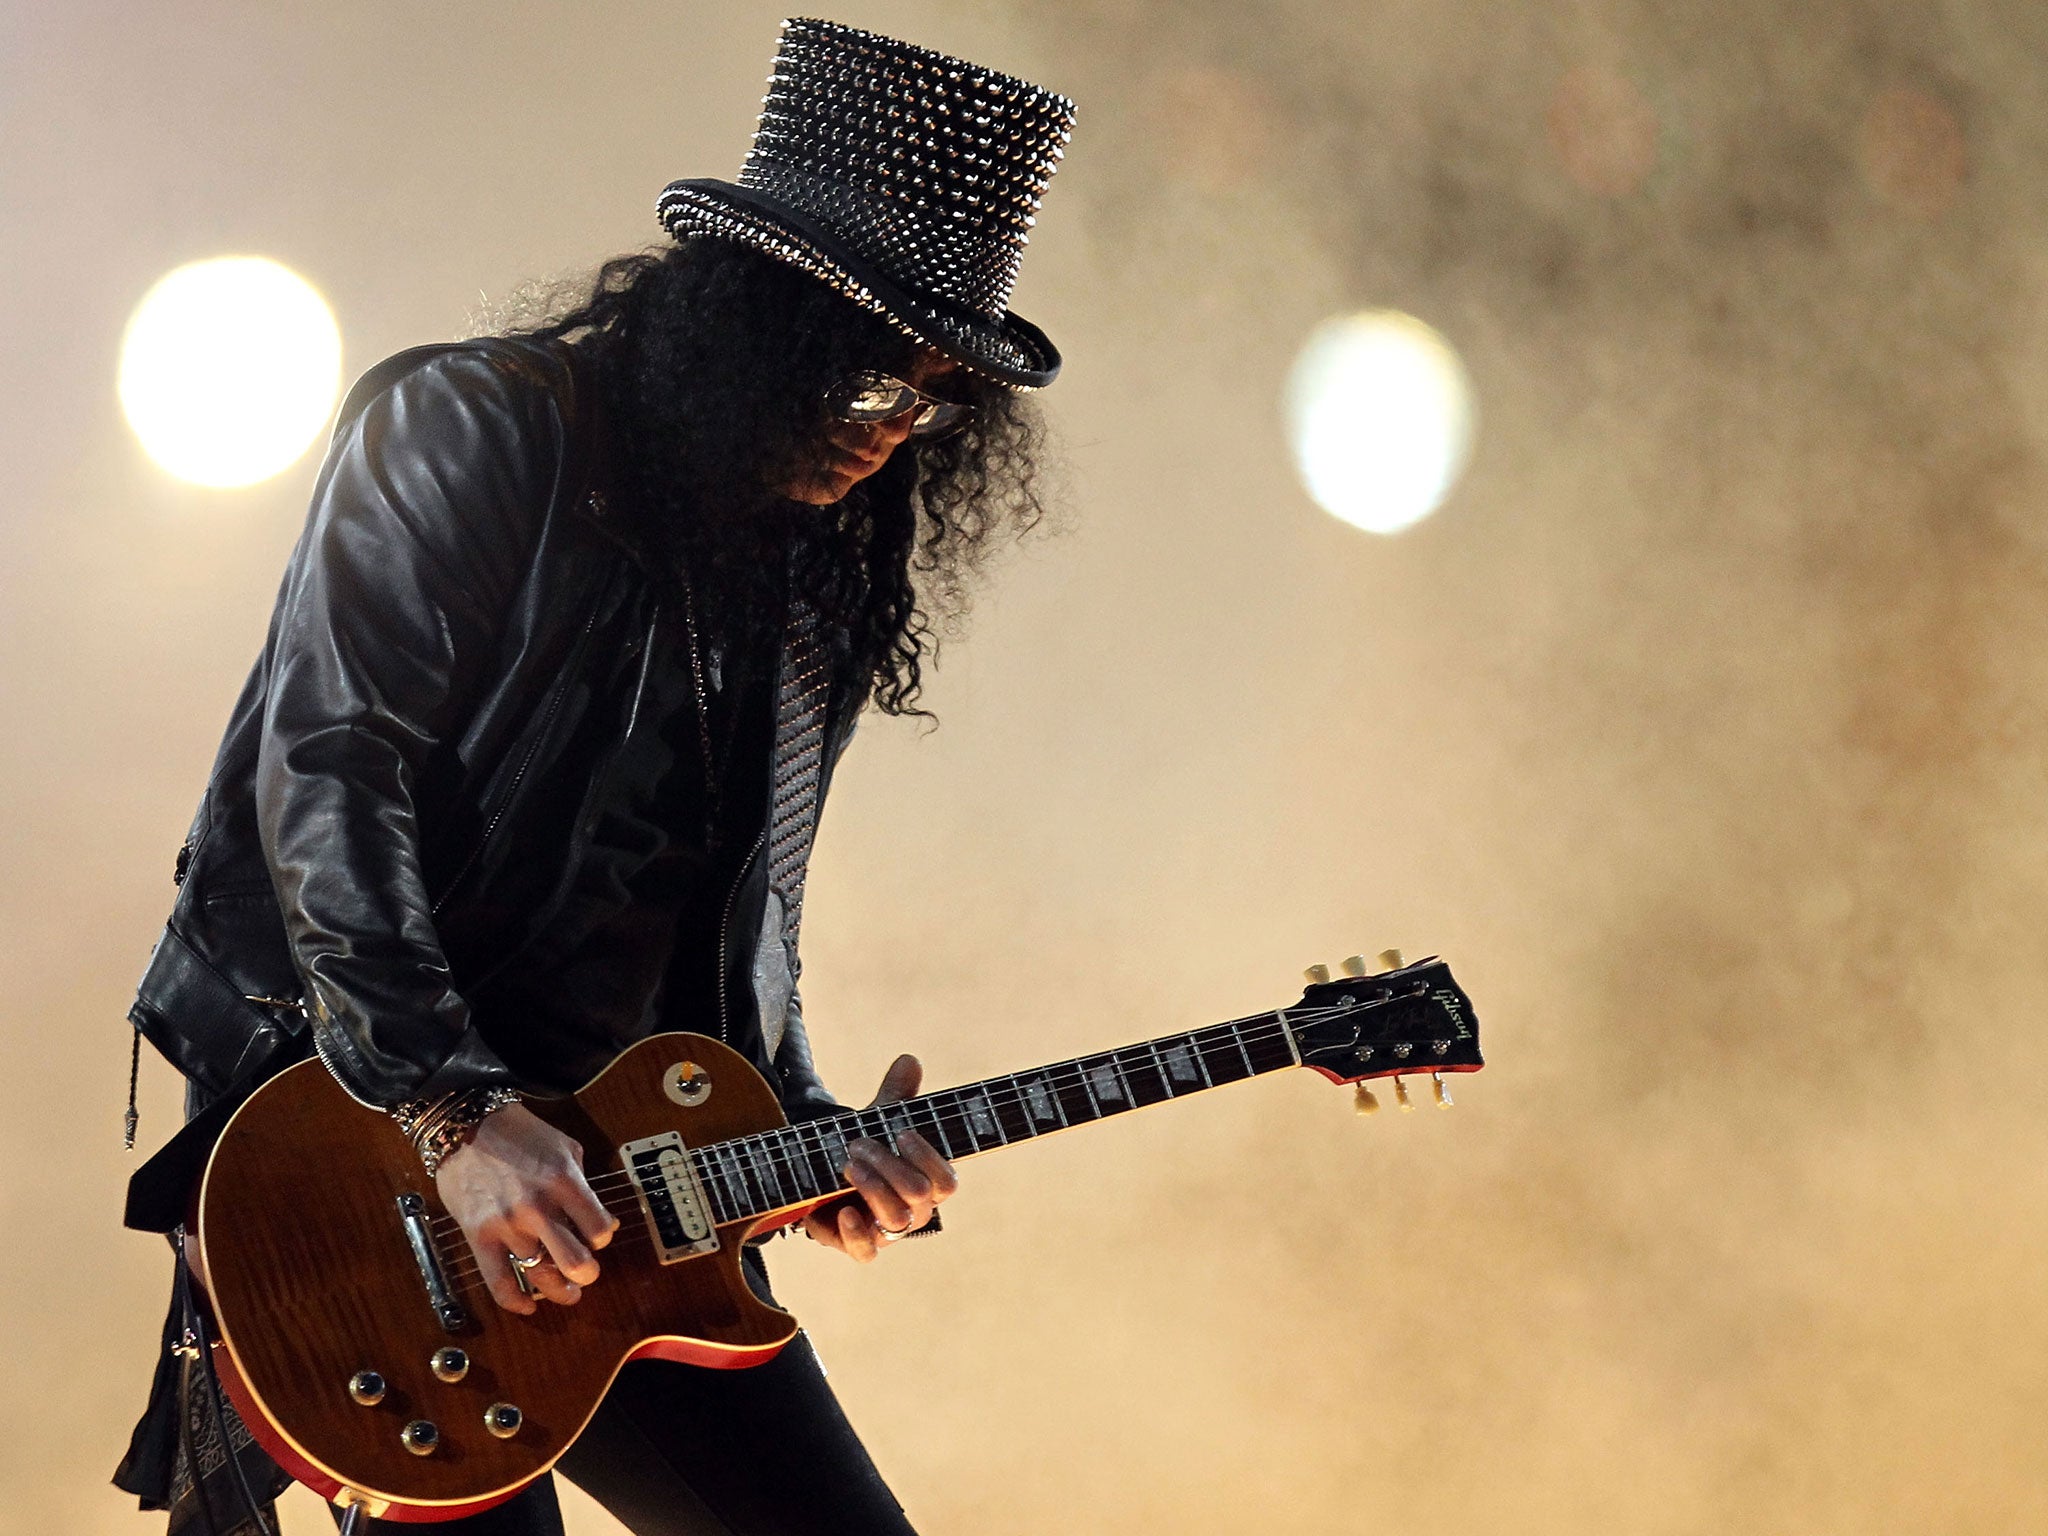 Slash and the rest of the band last played together in 1993